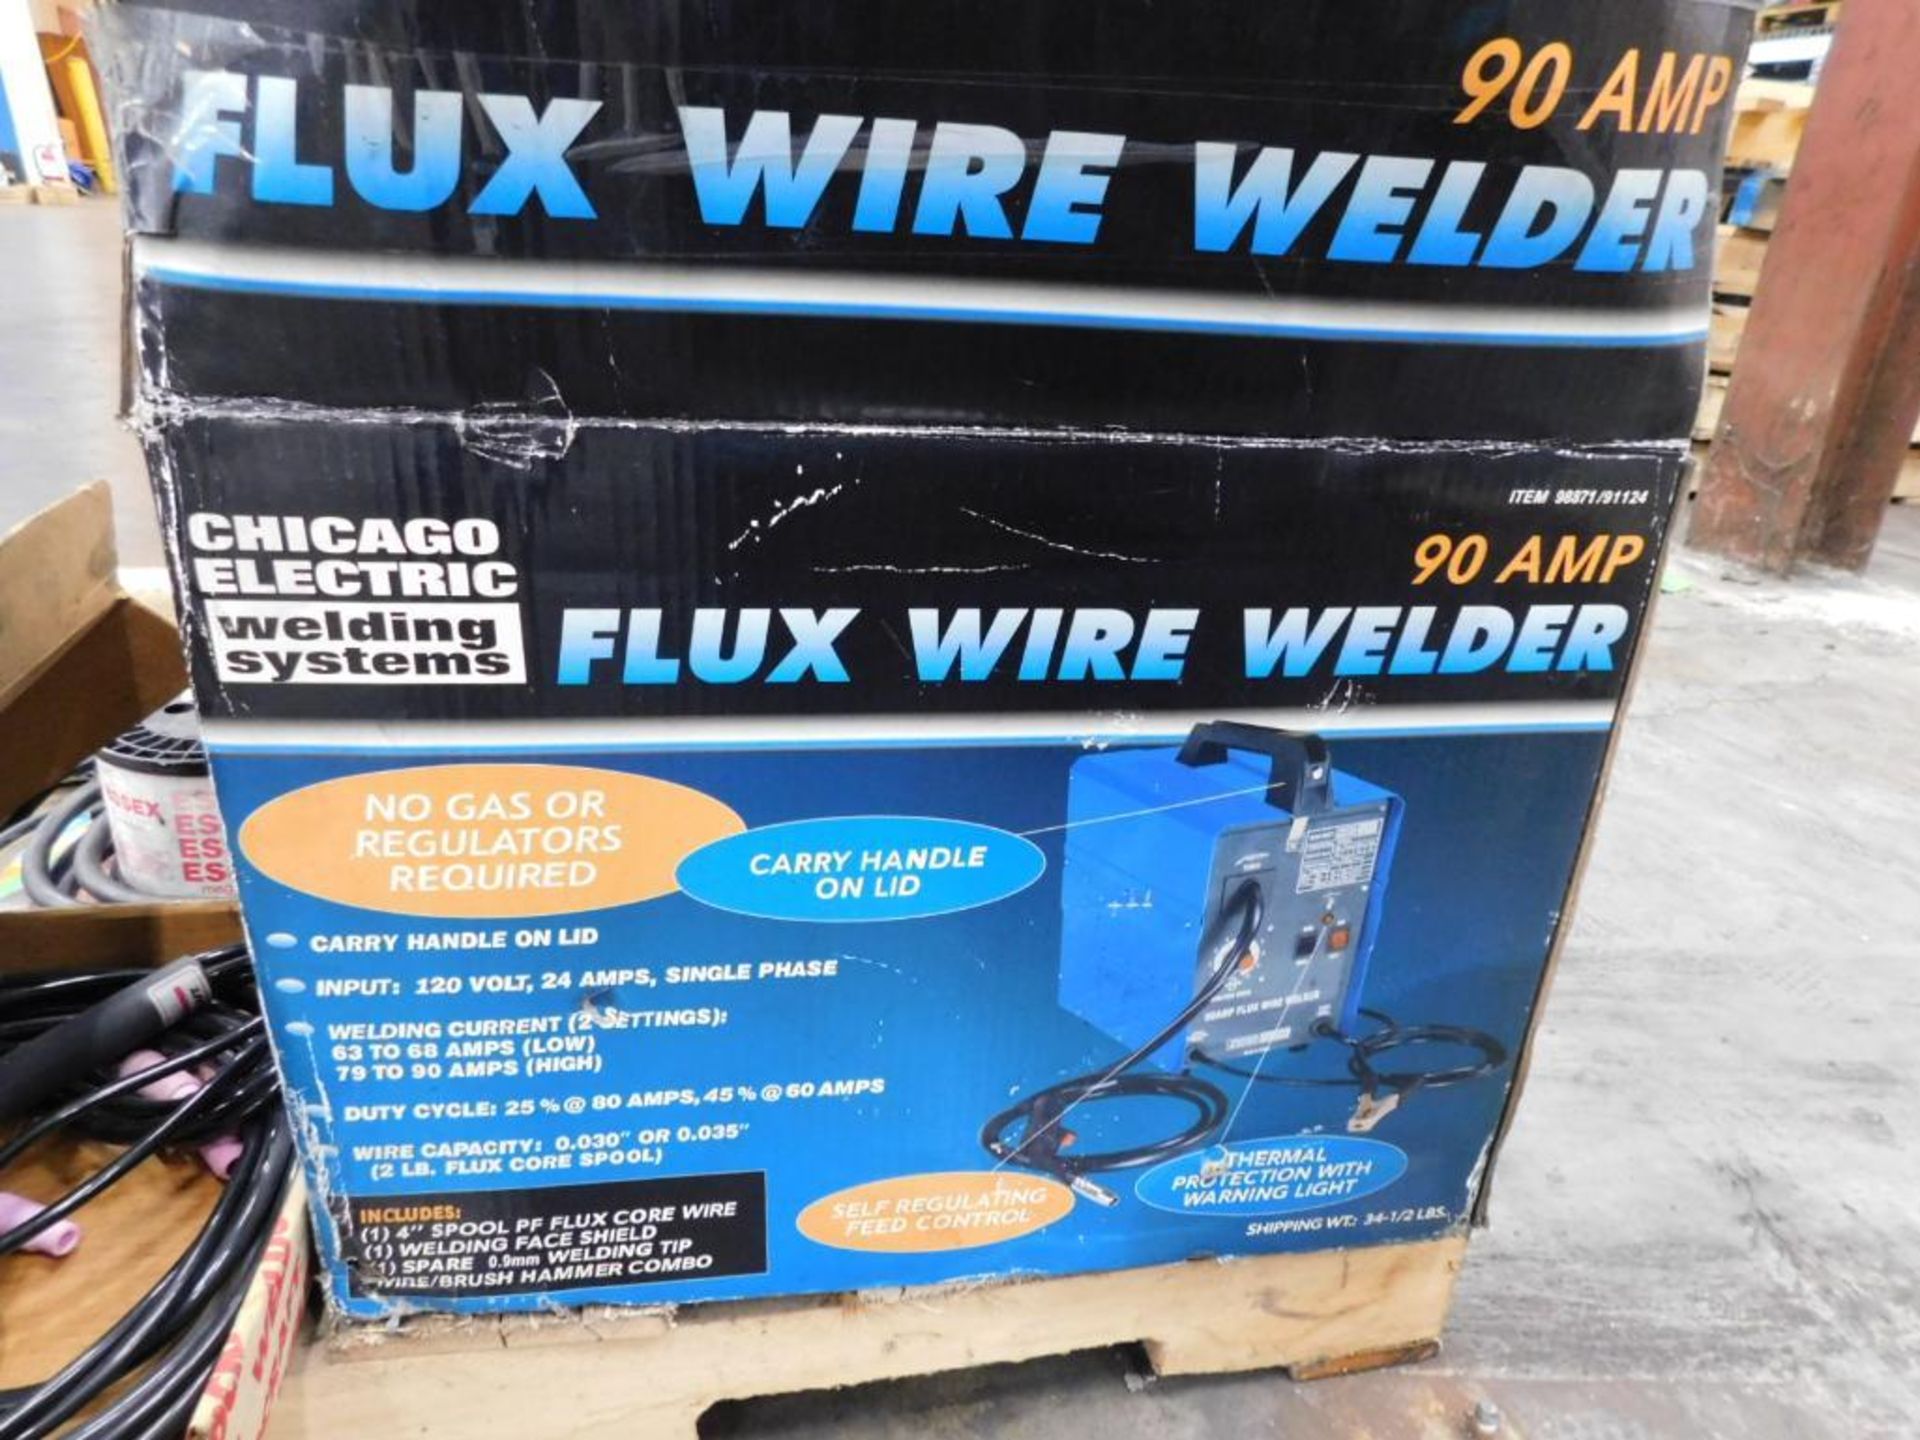 LOT: Chicago Electric Flux Wire Welder, 90 Amp., 120 Volt, 24 Amps, Single Phase, Assorted Welding W - Image 2 of 9